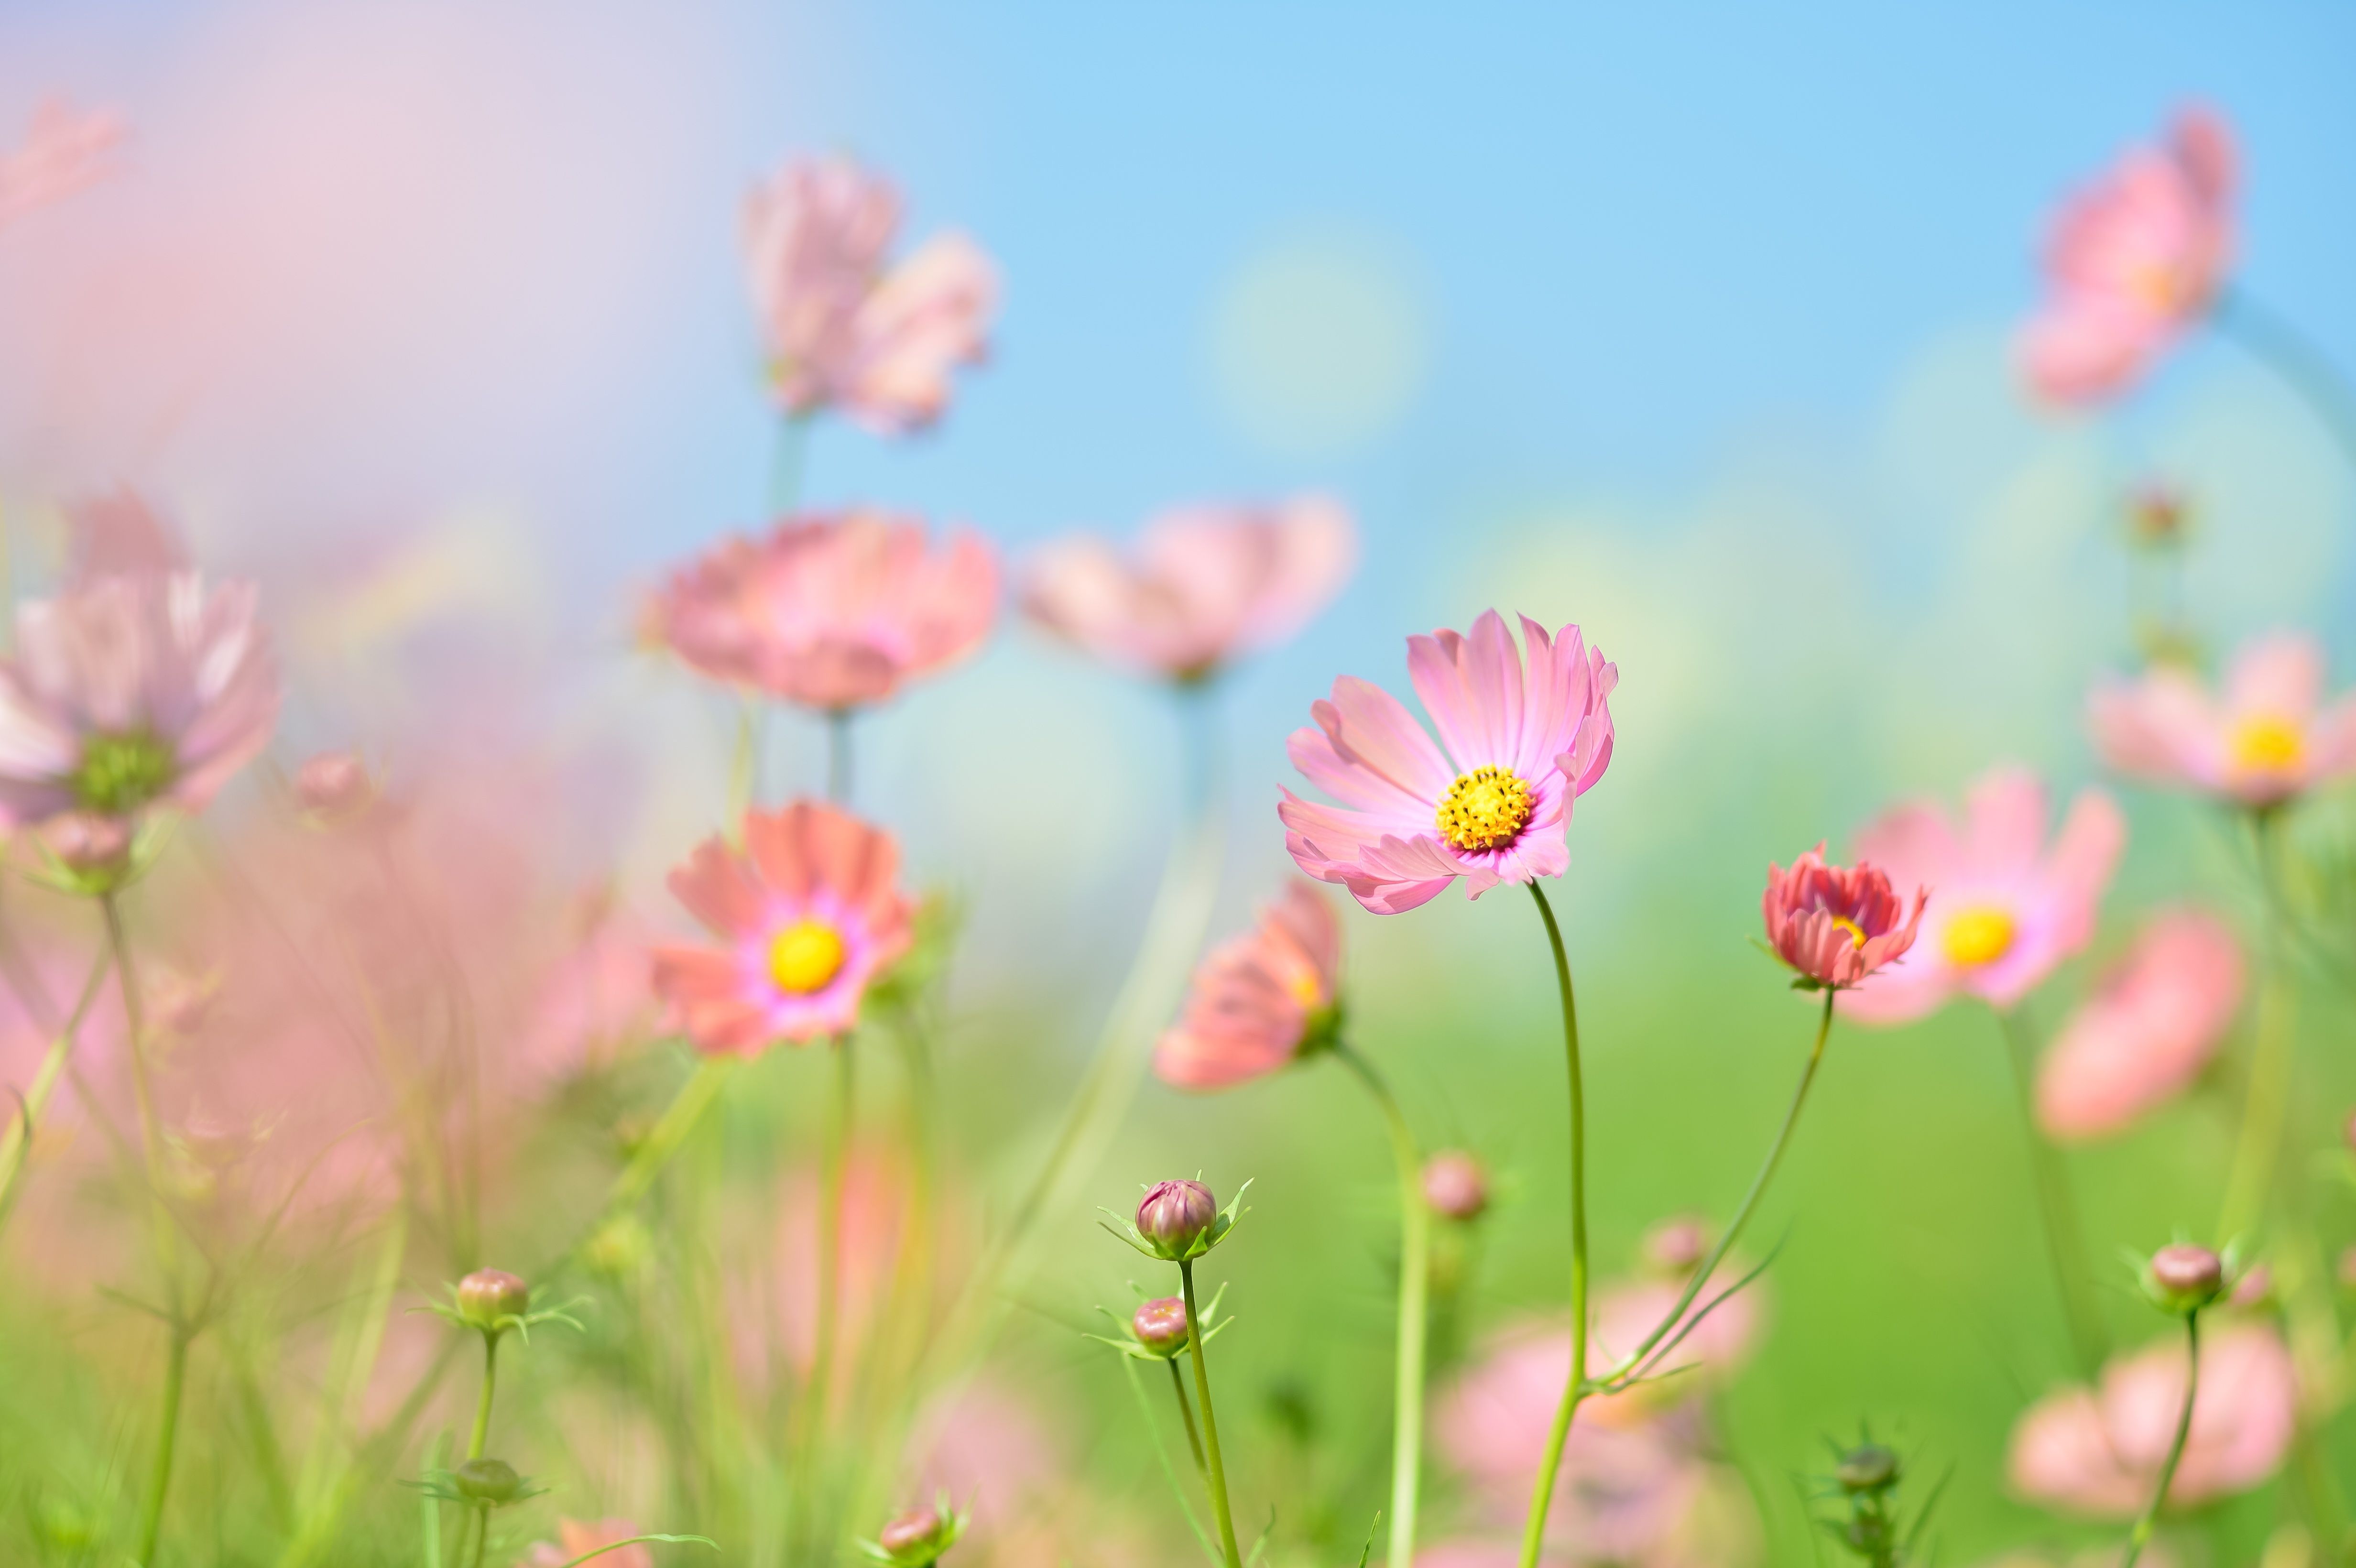 A field of pink and yellow flowers with a blue sky in the background. - Garden